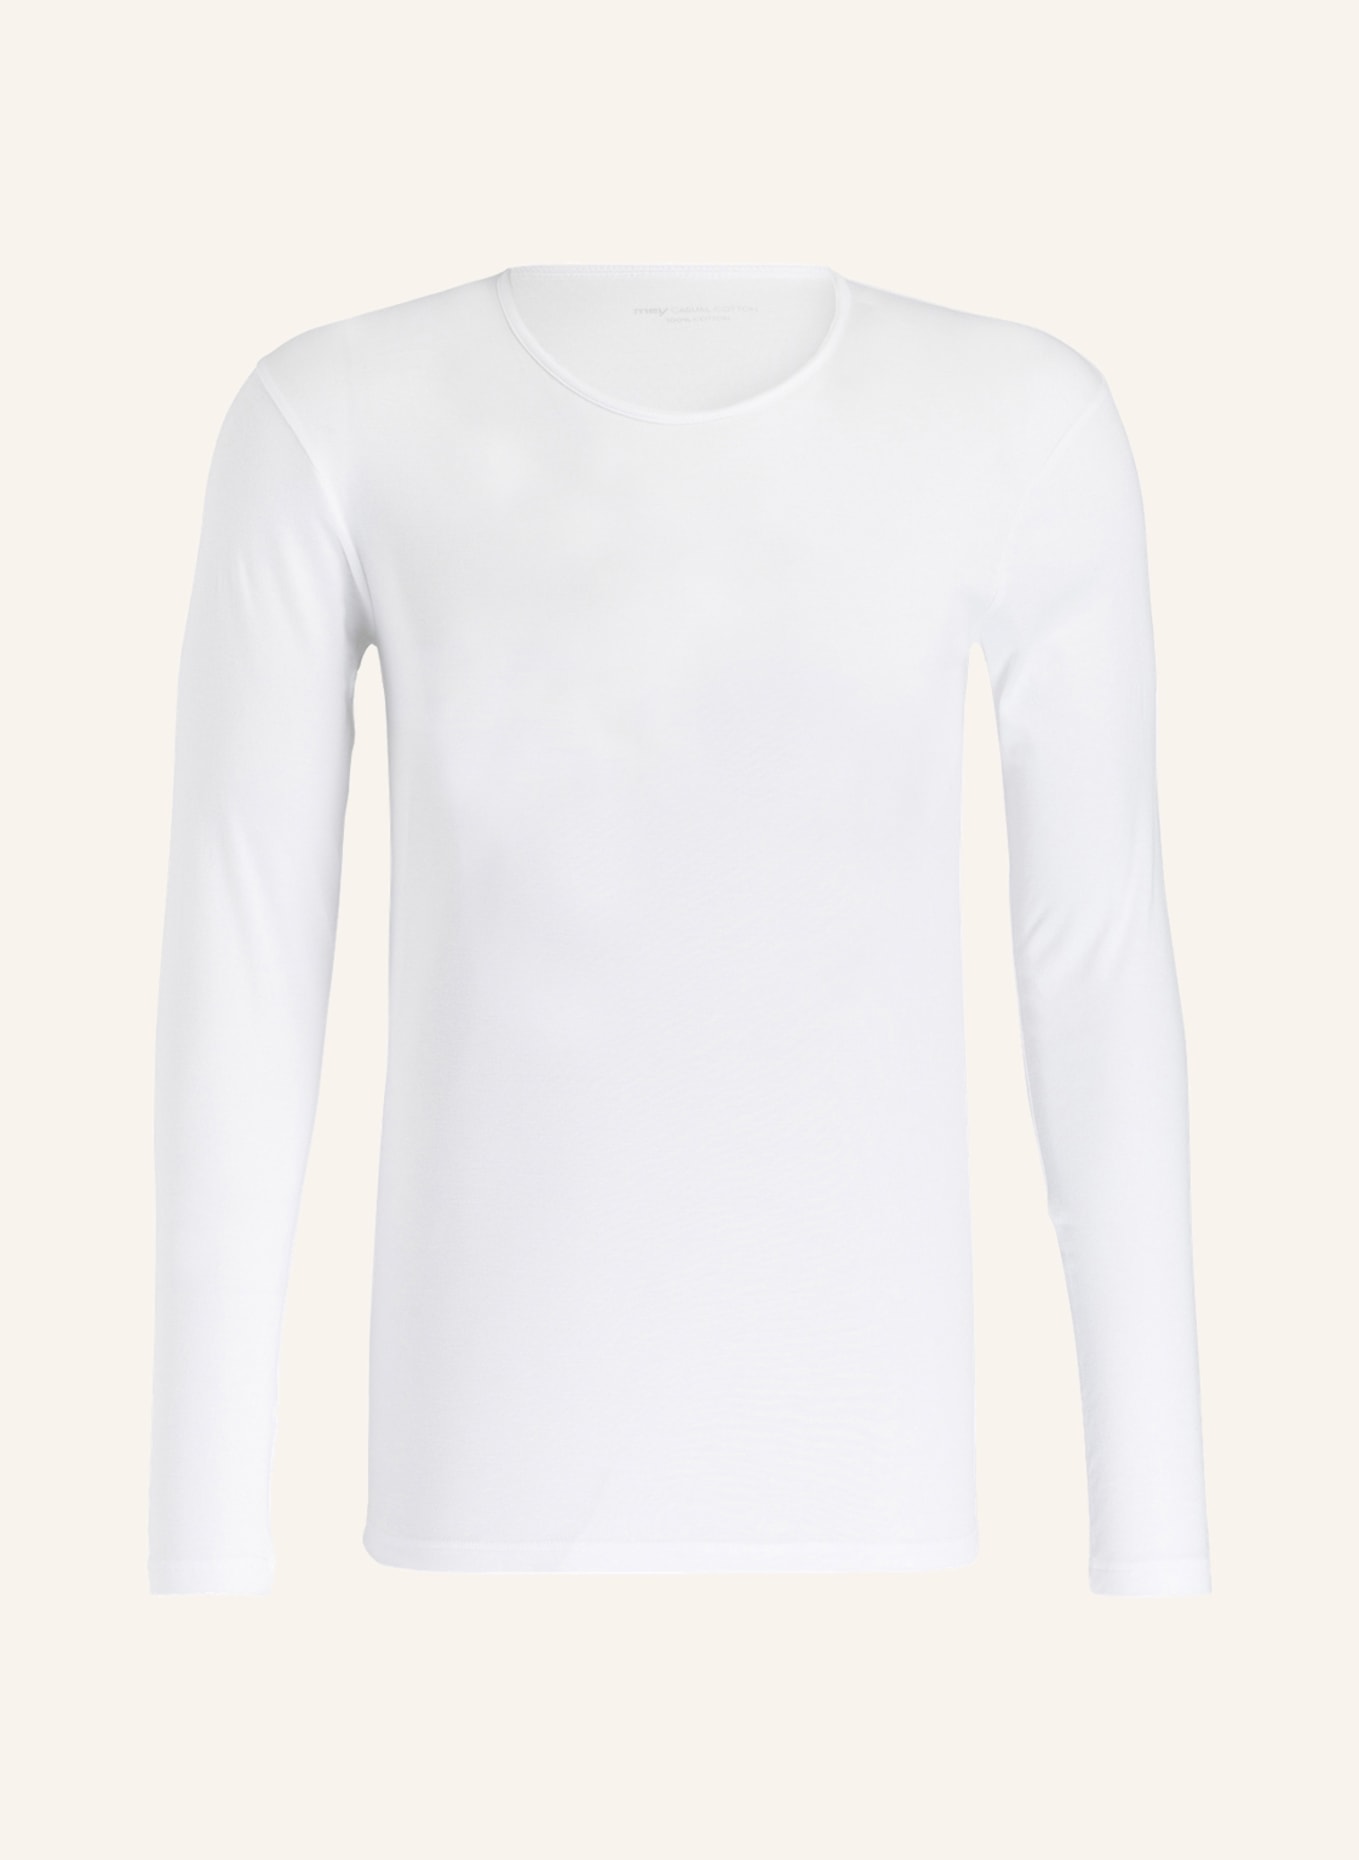 mey Long sleeve shirt series CASUAL COTTON, Color: WHITE (Image 1)